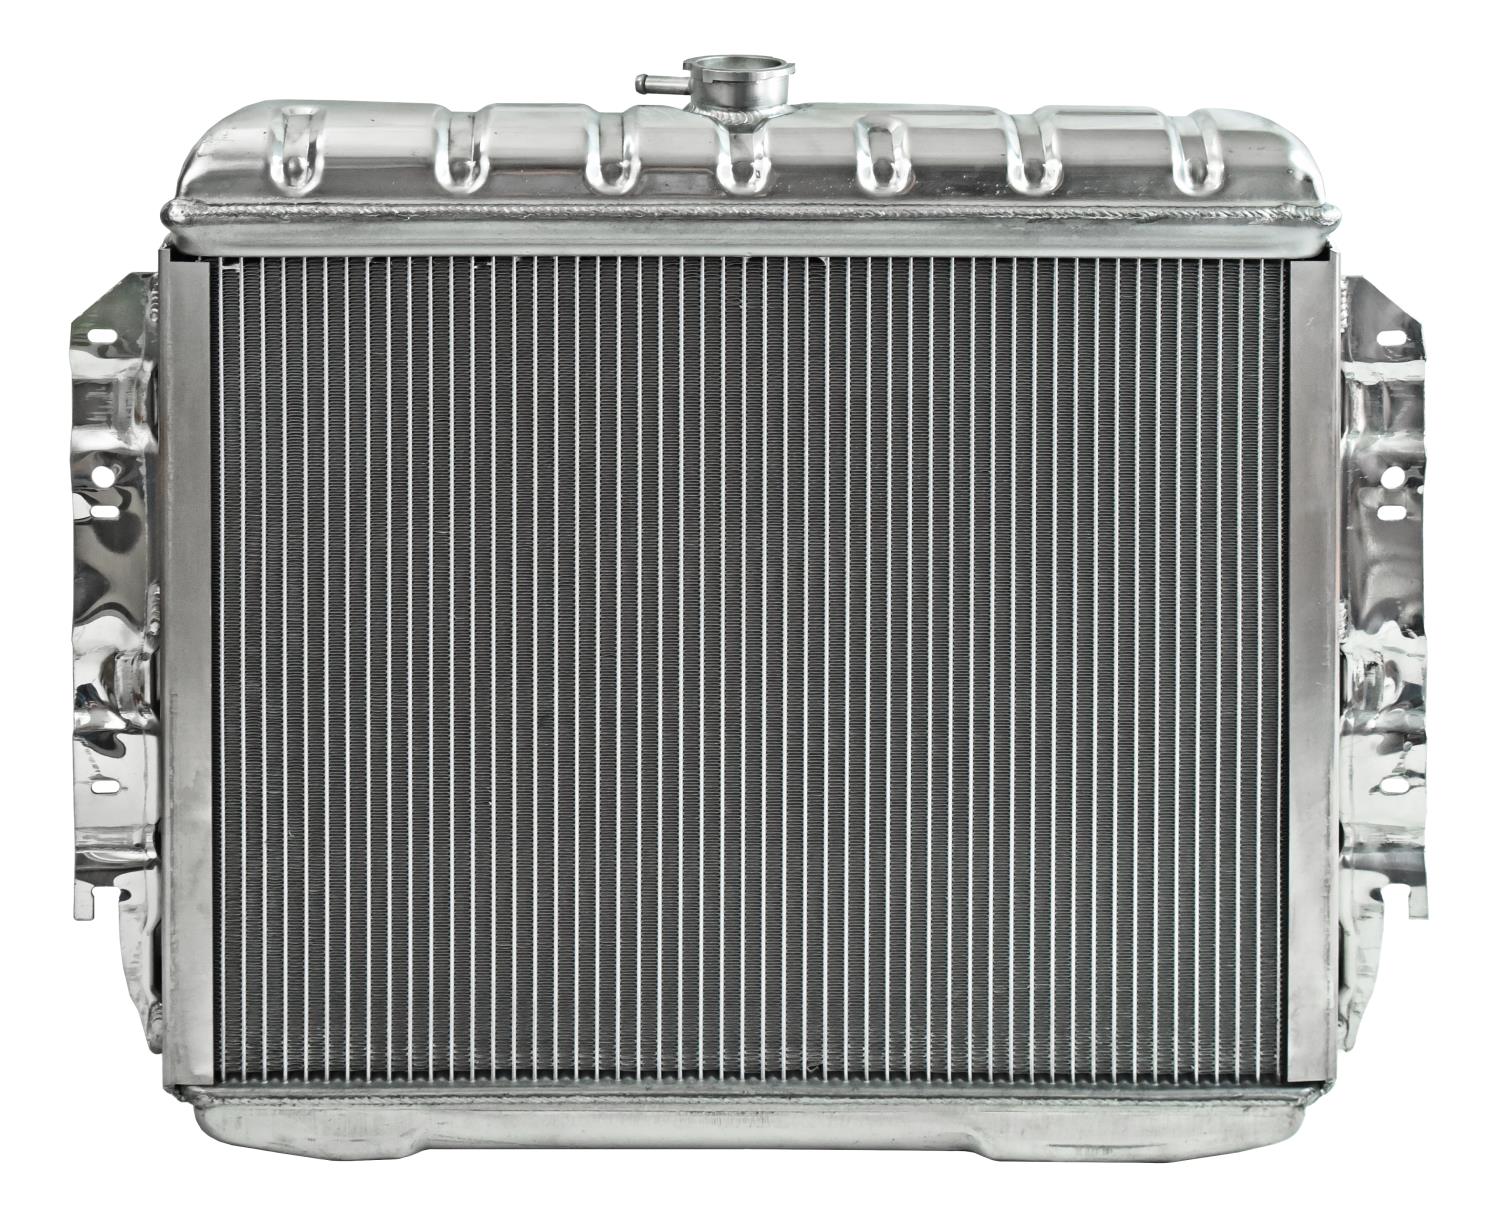 Reproduction Aluminum Radiator for Select 1966-1969 Mopar B Bodies With 426 Engine